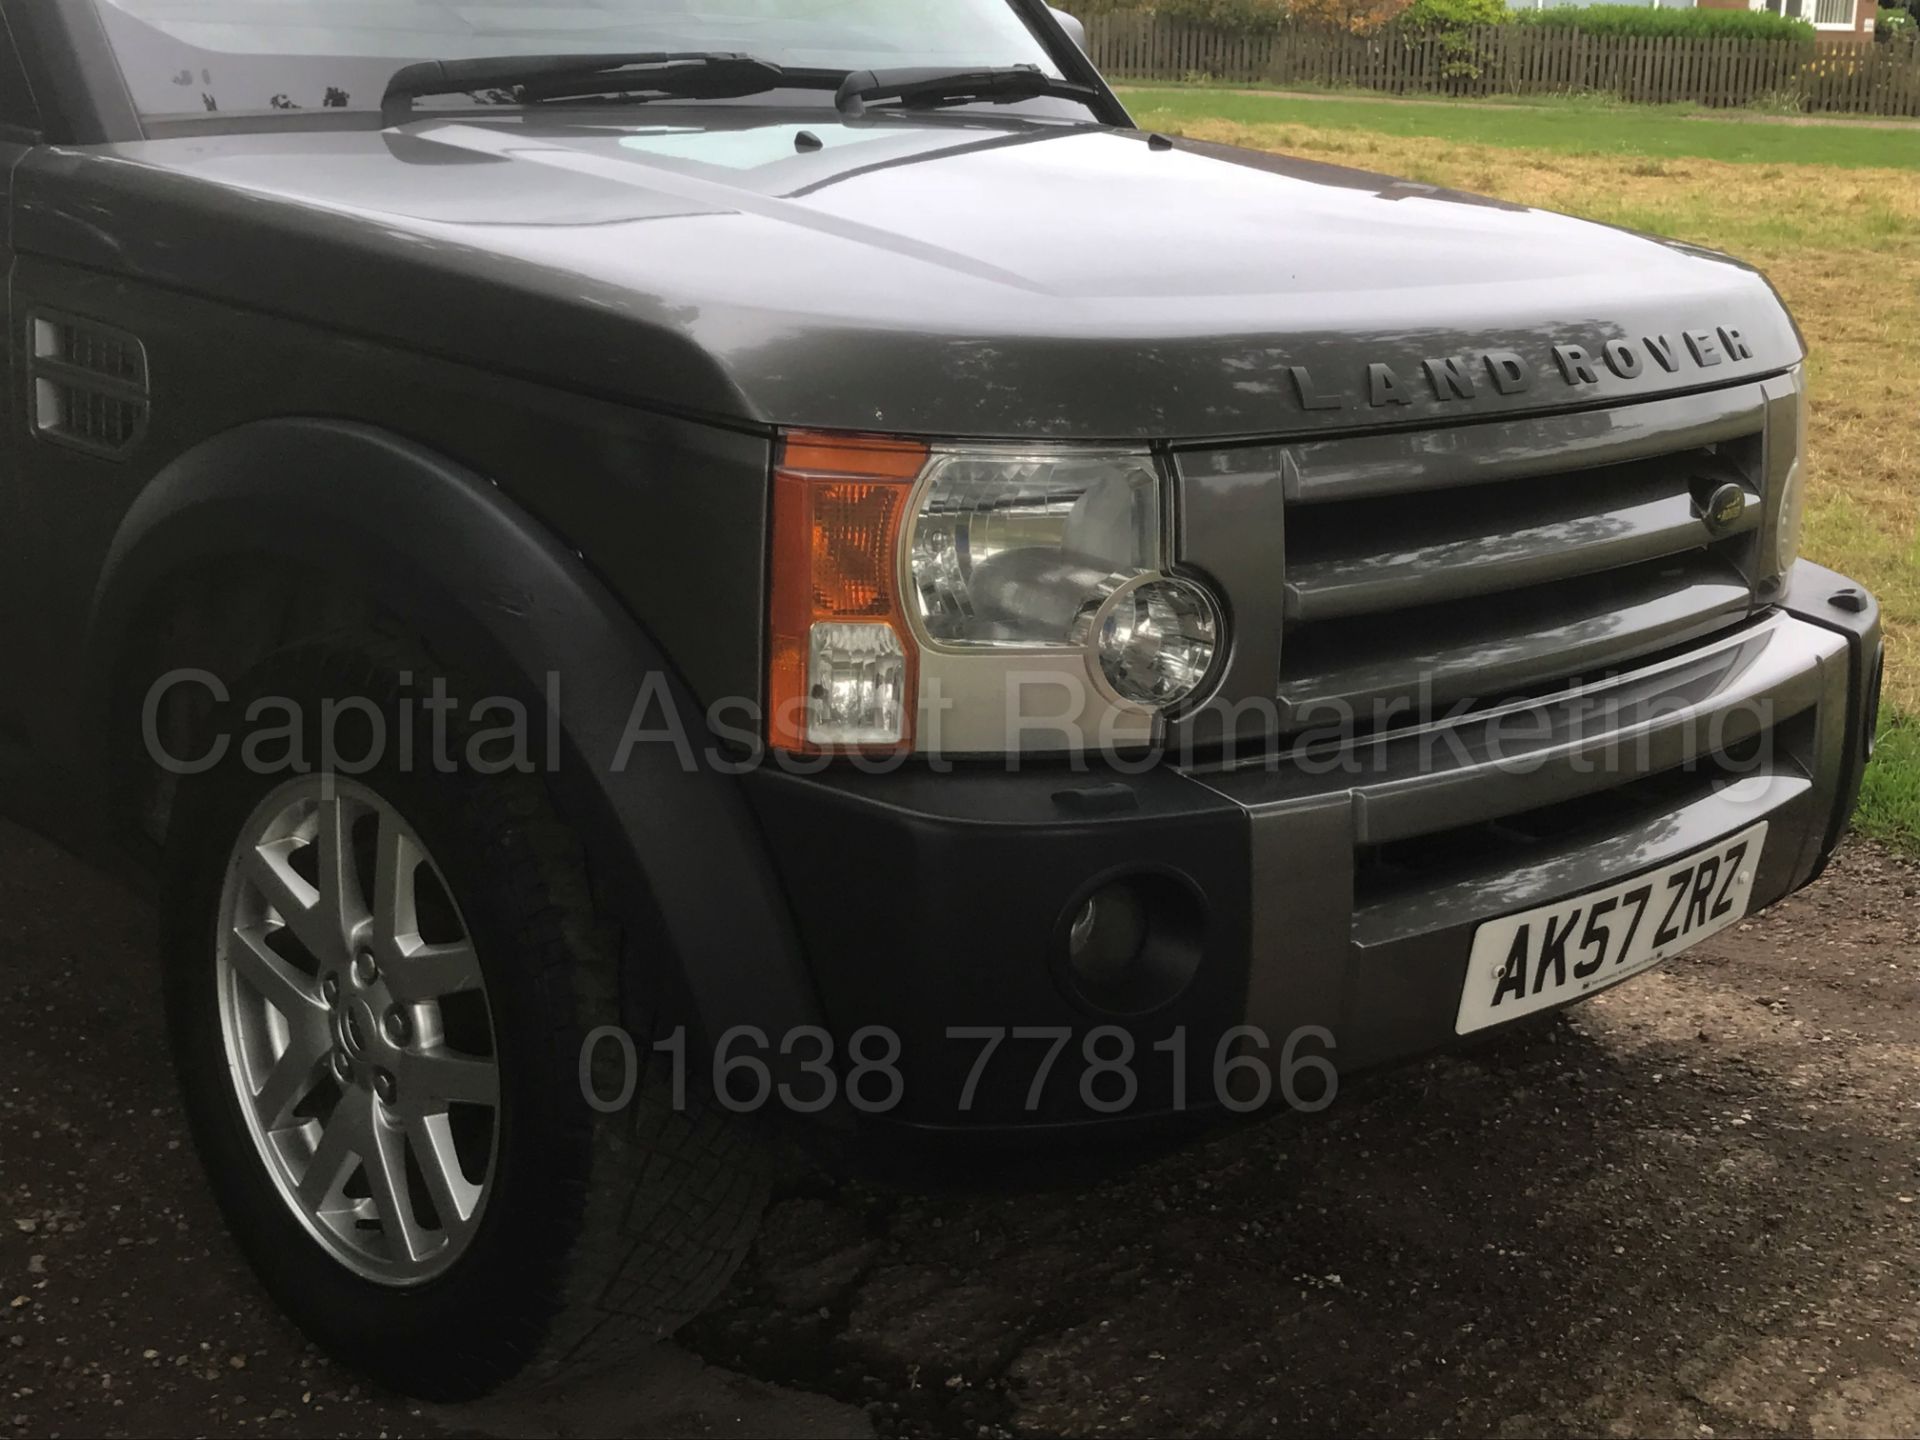 (On Sale) LAND ROVER DISCOVERY 3 'XS EDITION' **COMMERCIAL VAN**(2008 MODEL) 'TDV6-190 BHP' (NO VAT) - Image 13 of 38